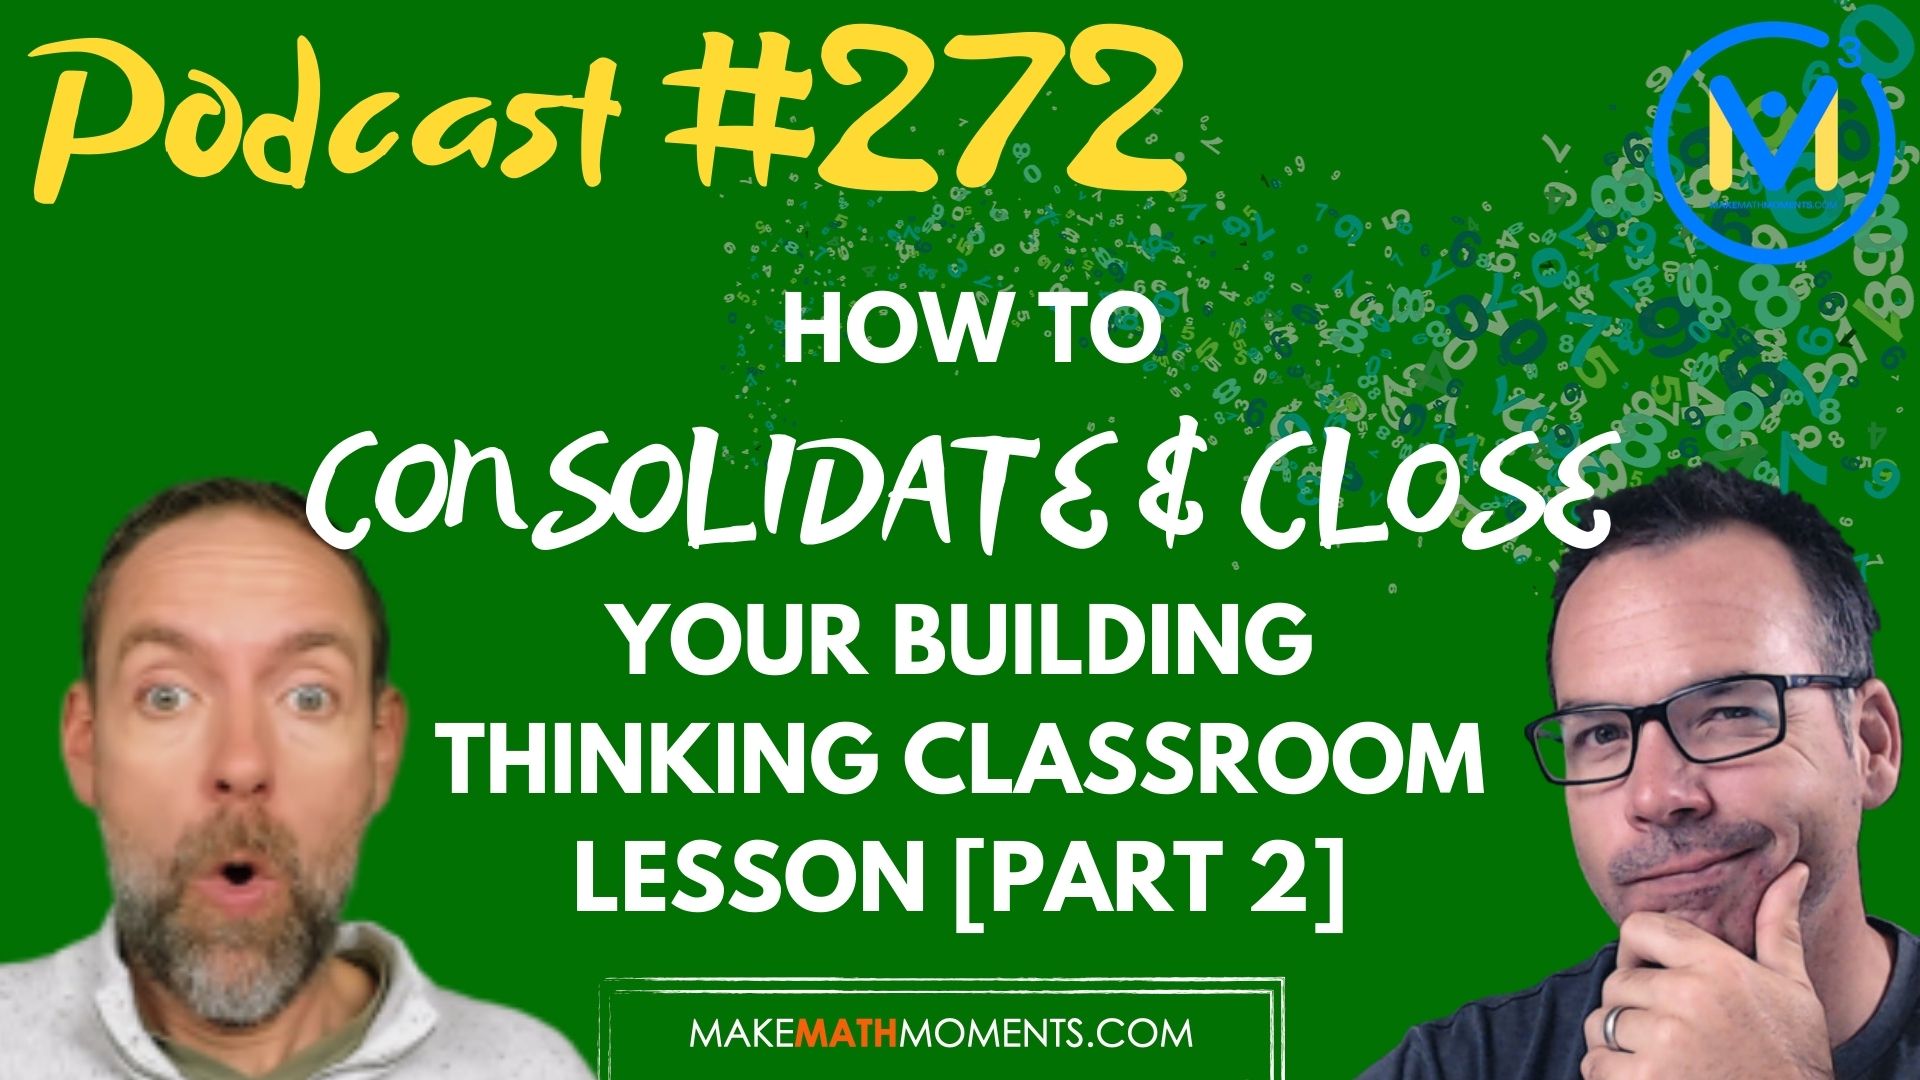 Episode #272: How To Consolidate & Close Your Building Thinking Classroom Lesson [Part 2]